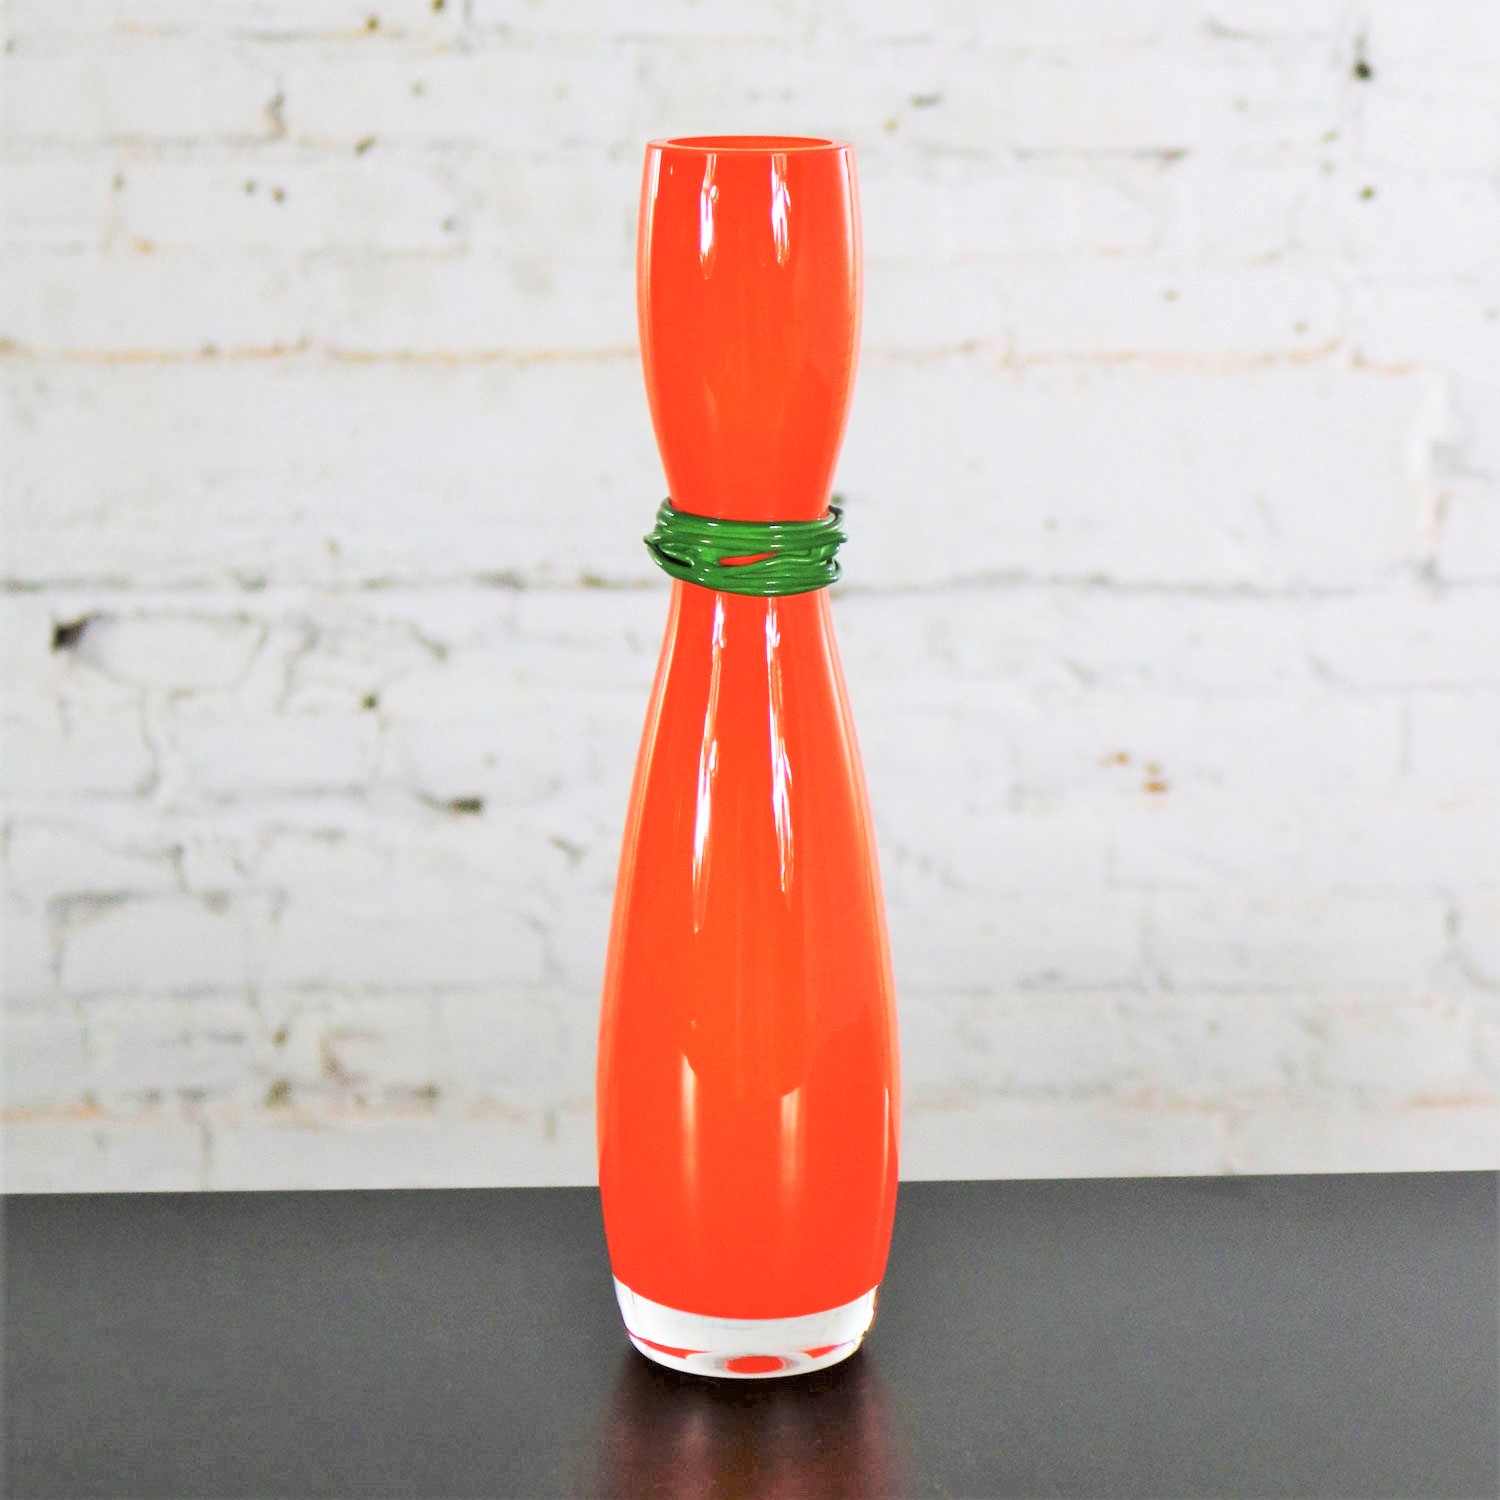 Czech Bohemian Hourglass Glass Vase by Rony Plesl in Orange and Green Signed